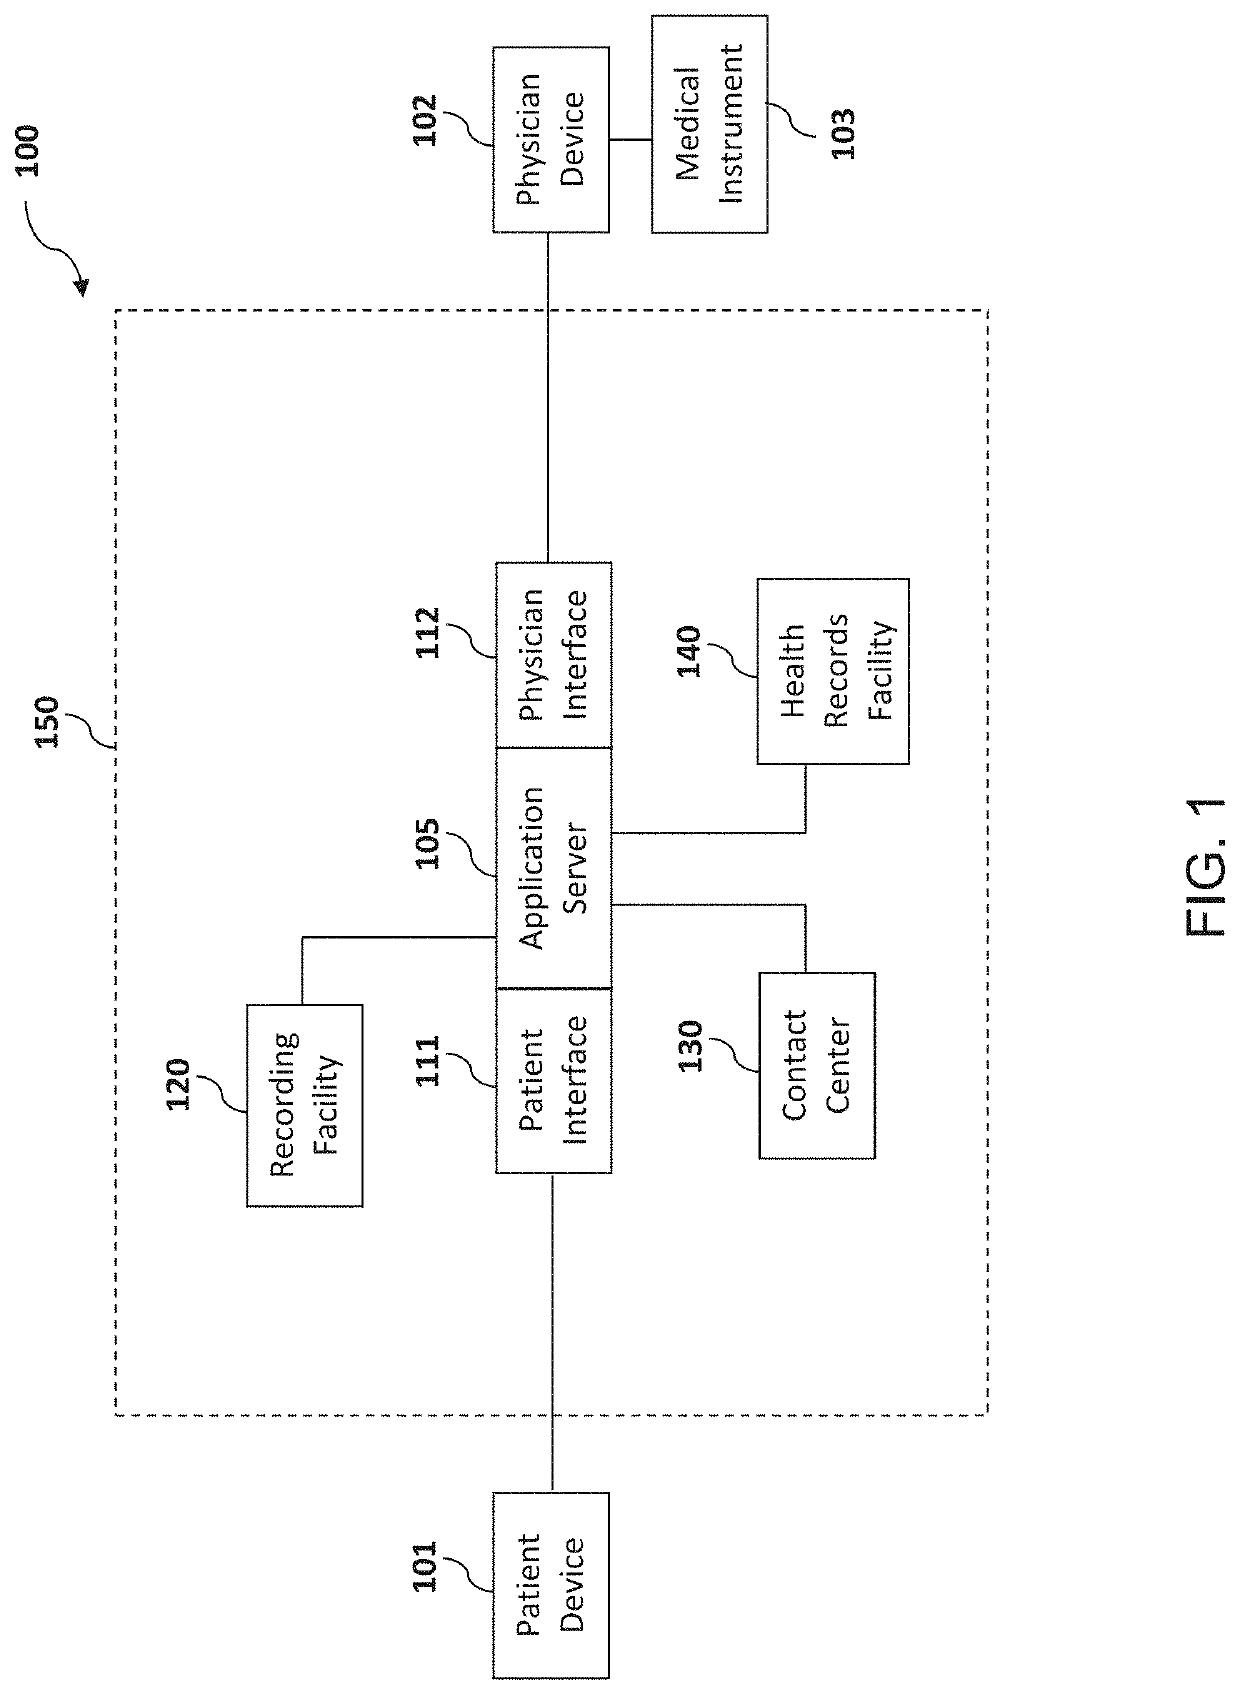 Medical incident response and reporting system and method